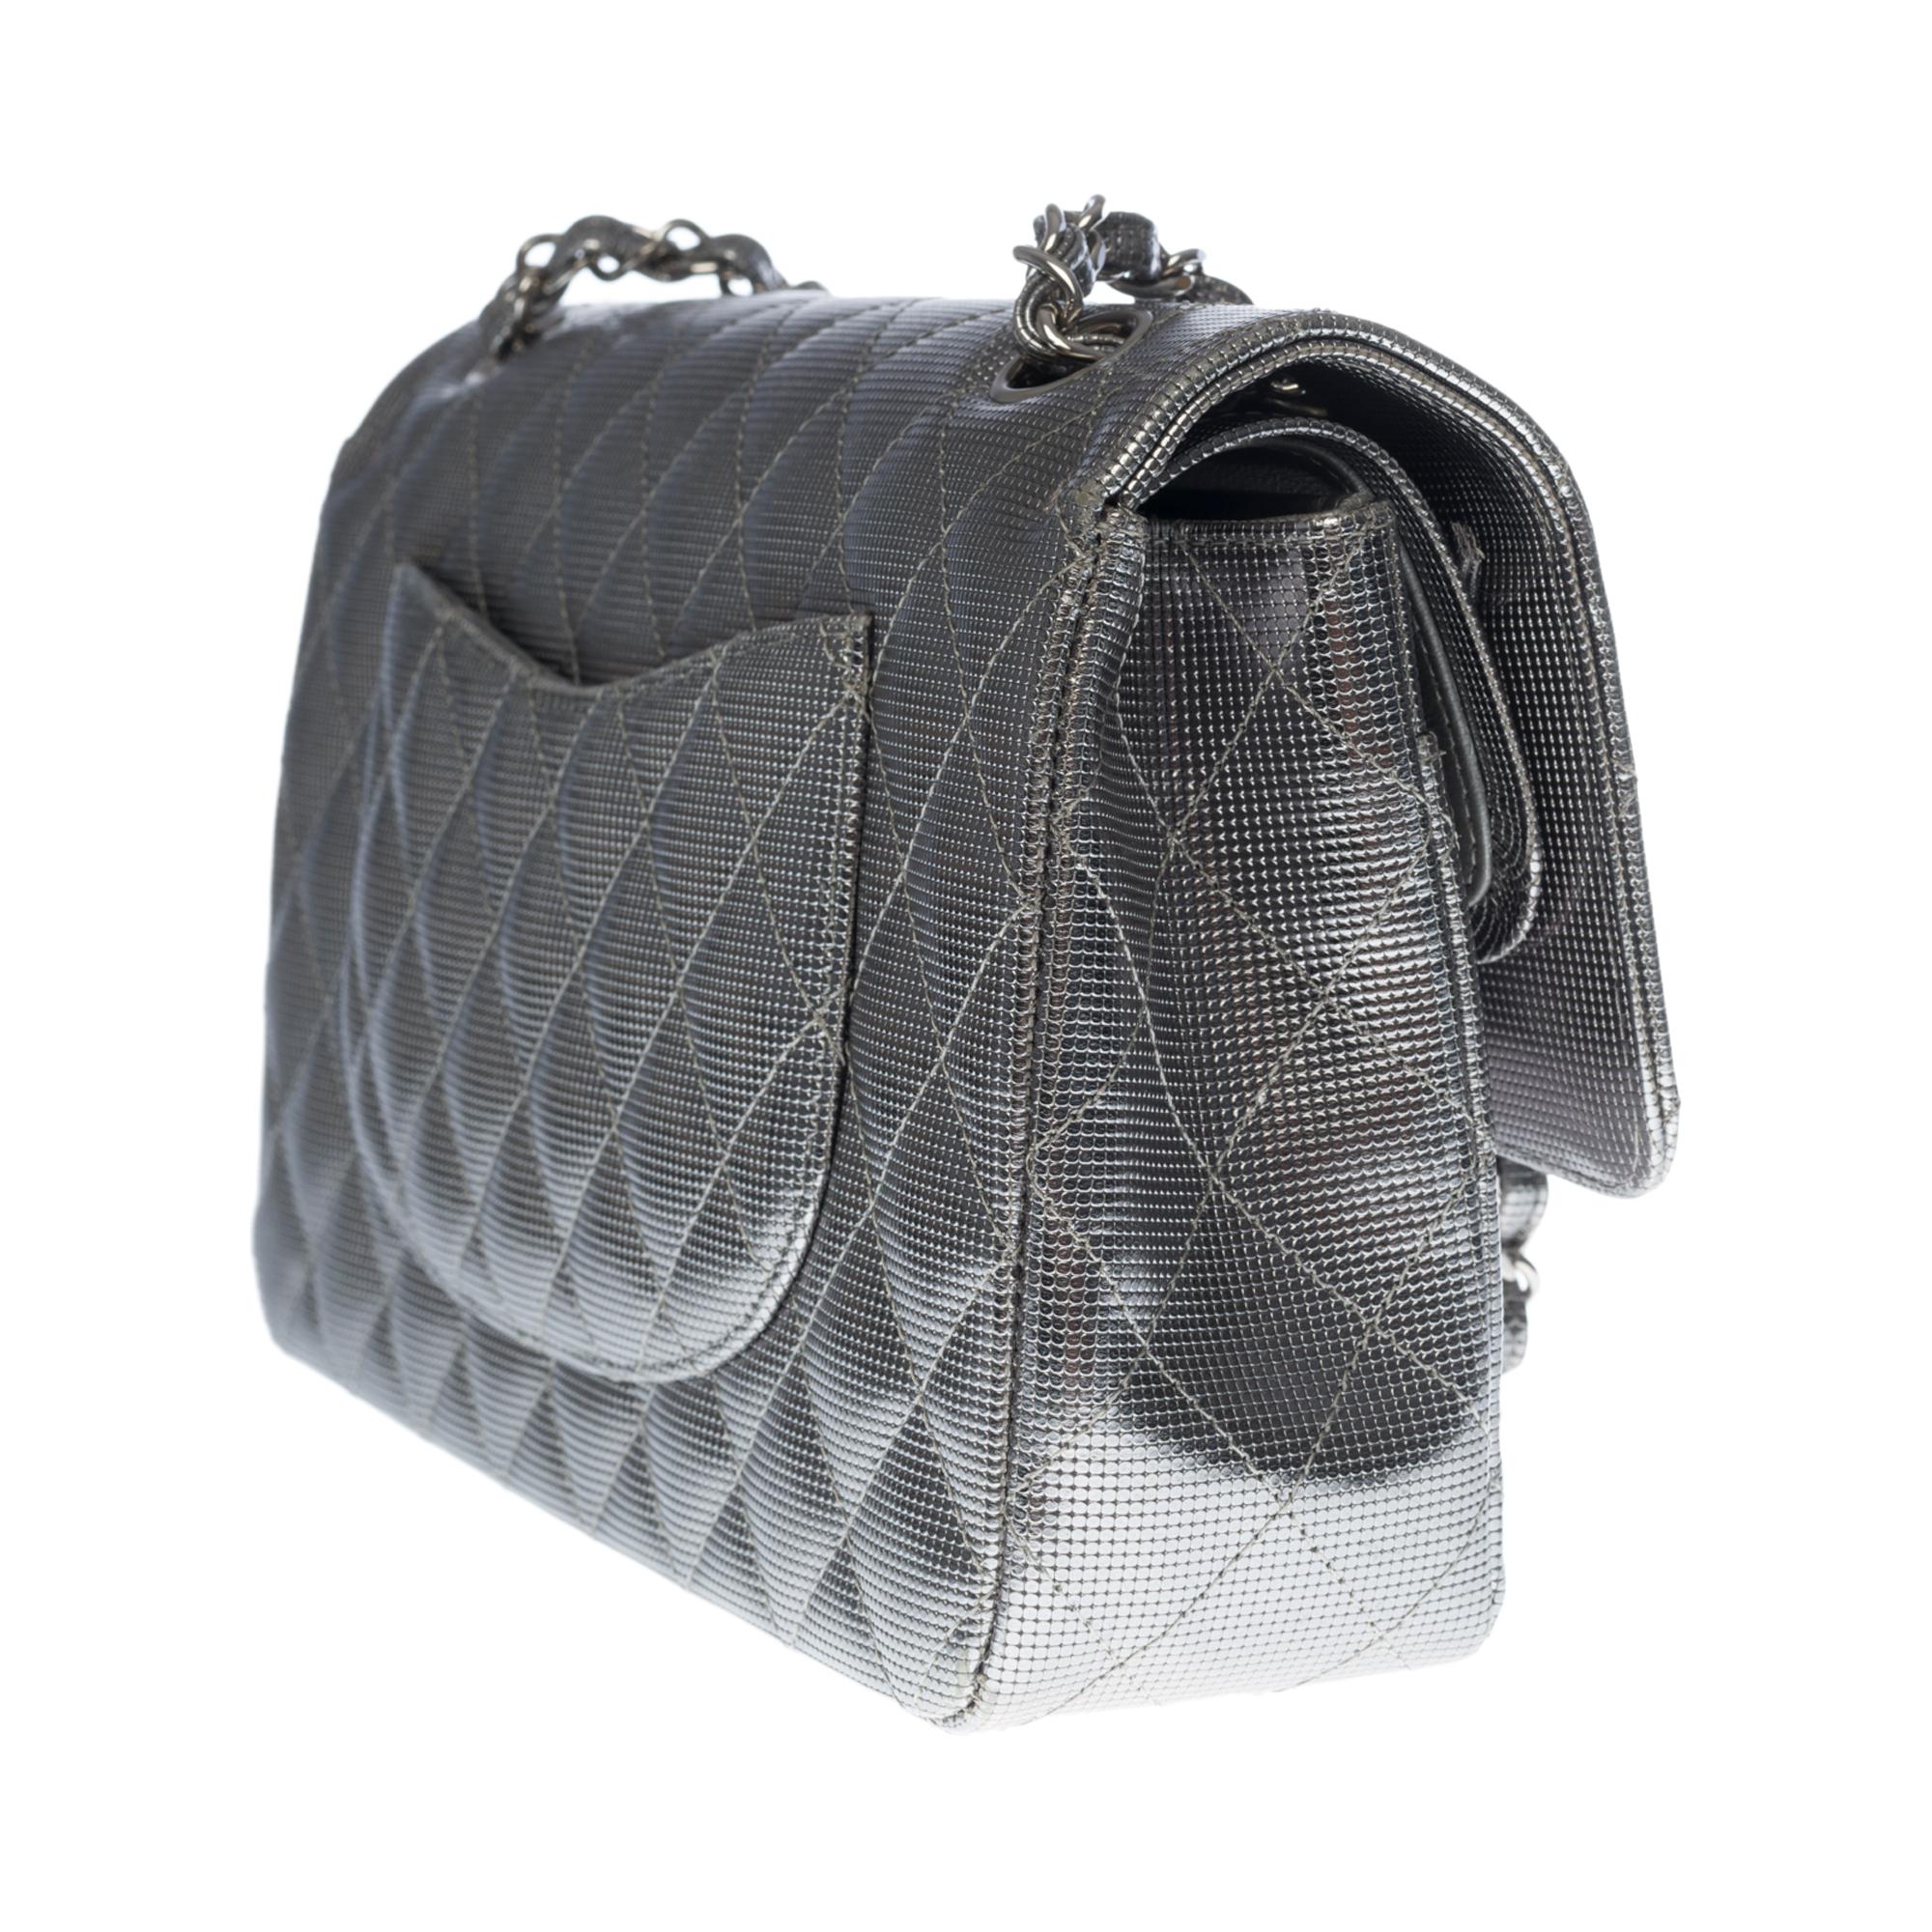 Women's Chanel Timeless double flap Shoulder bag in Silver Metal quilted leather, SHW